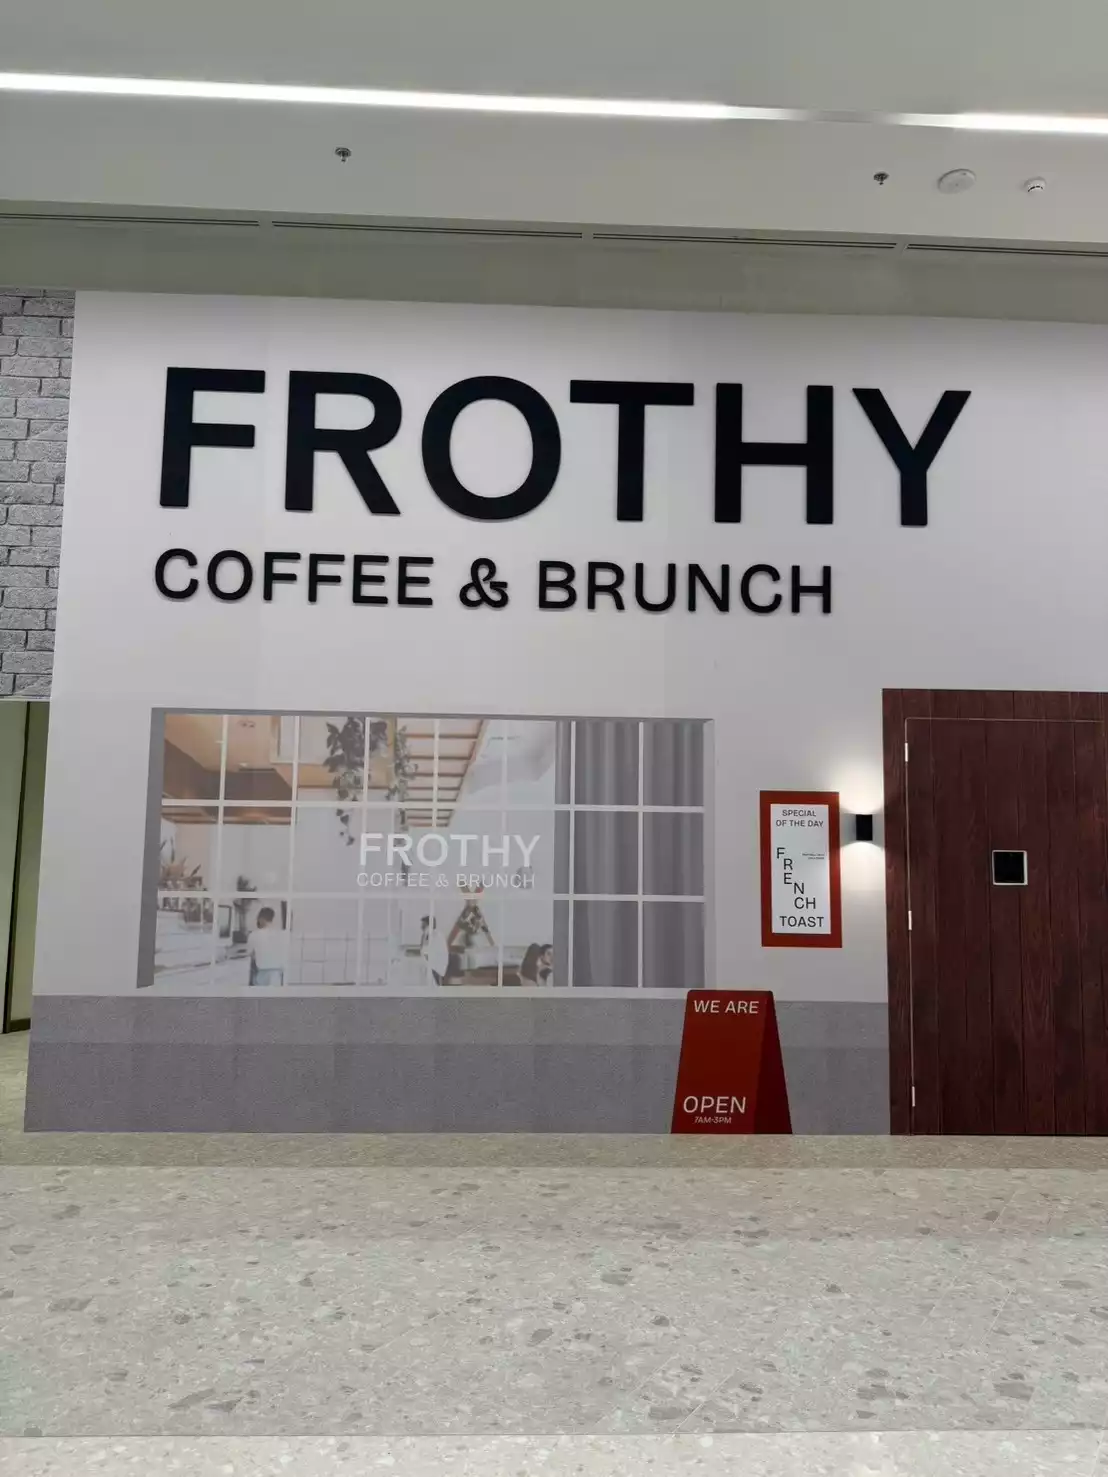 Frothy Coffee & Brunch